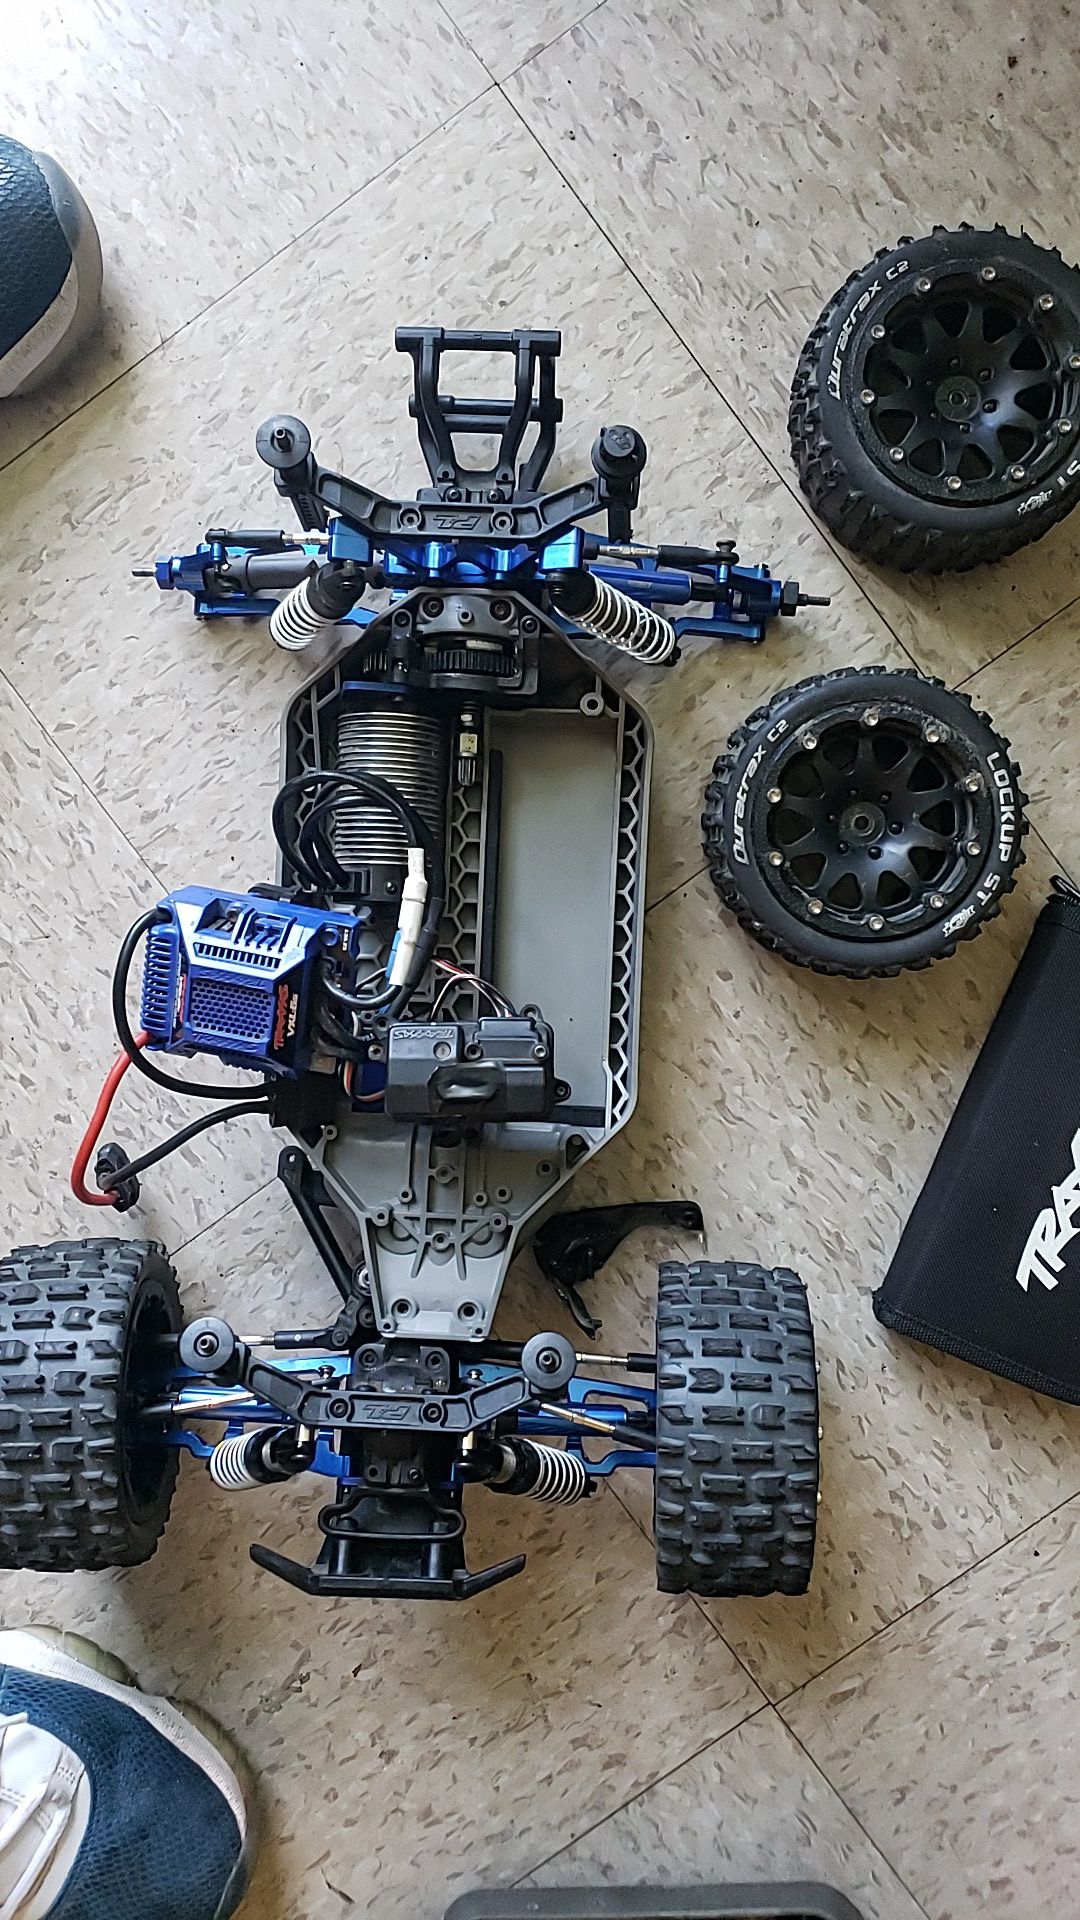 Traxxis 4x4 6s with up grade parts